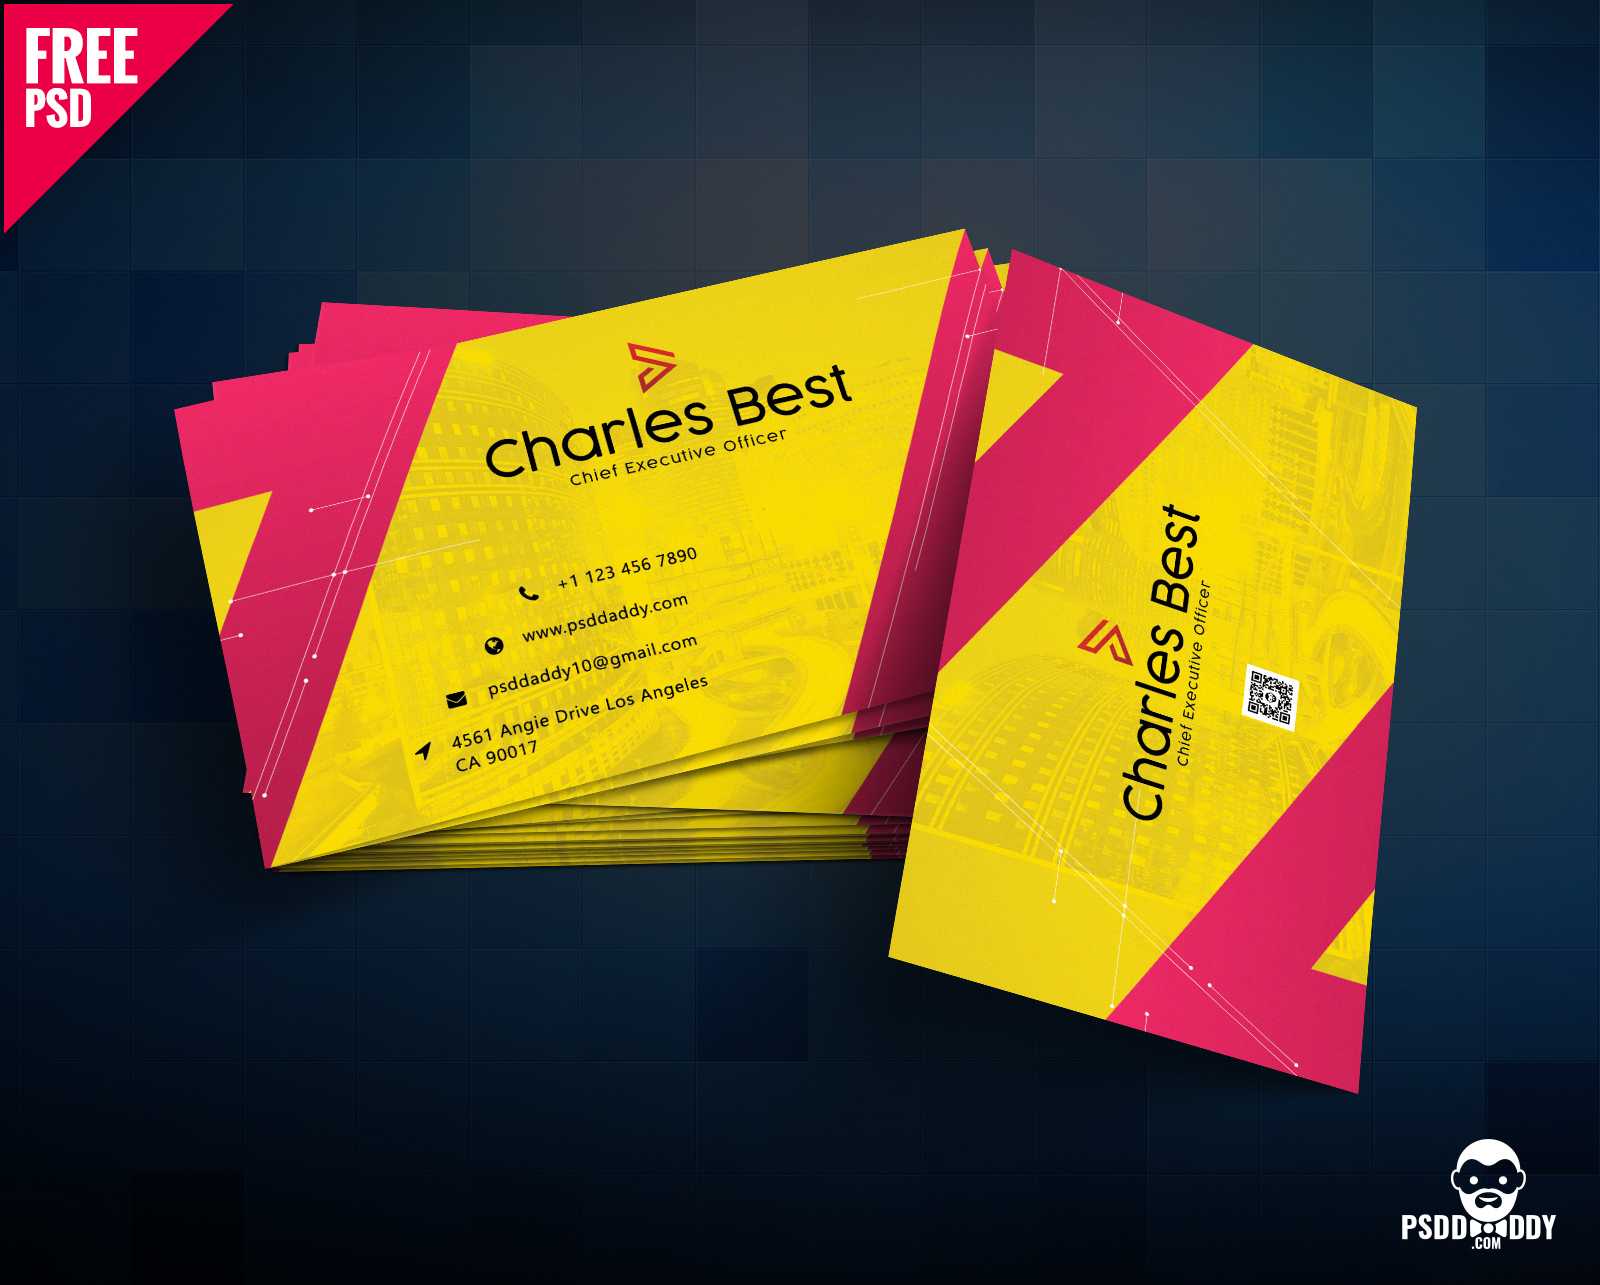 Download] Creative Business Card Free Psd | Psddaddy With Visiting Card Psd Template Free Download